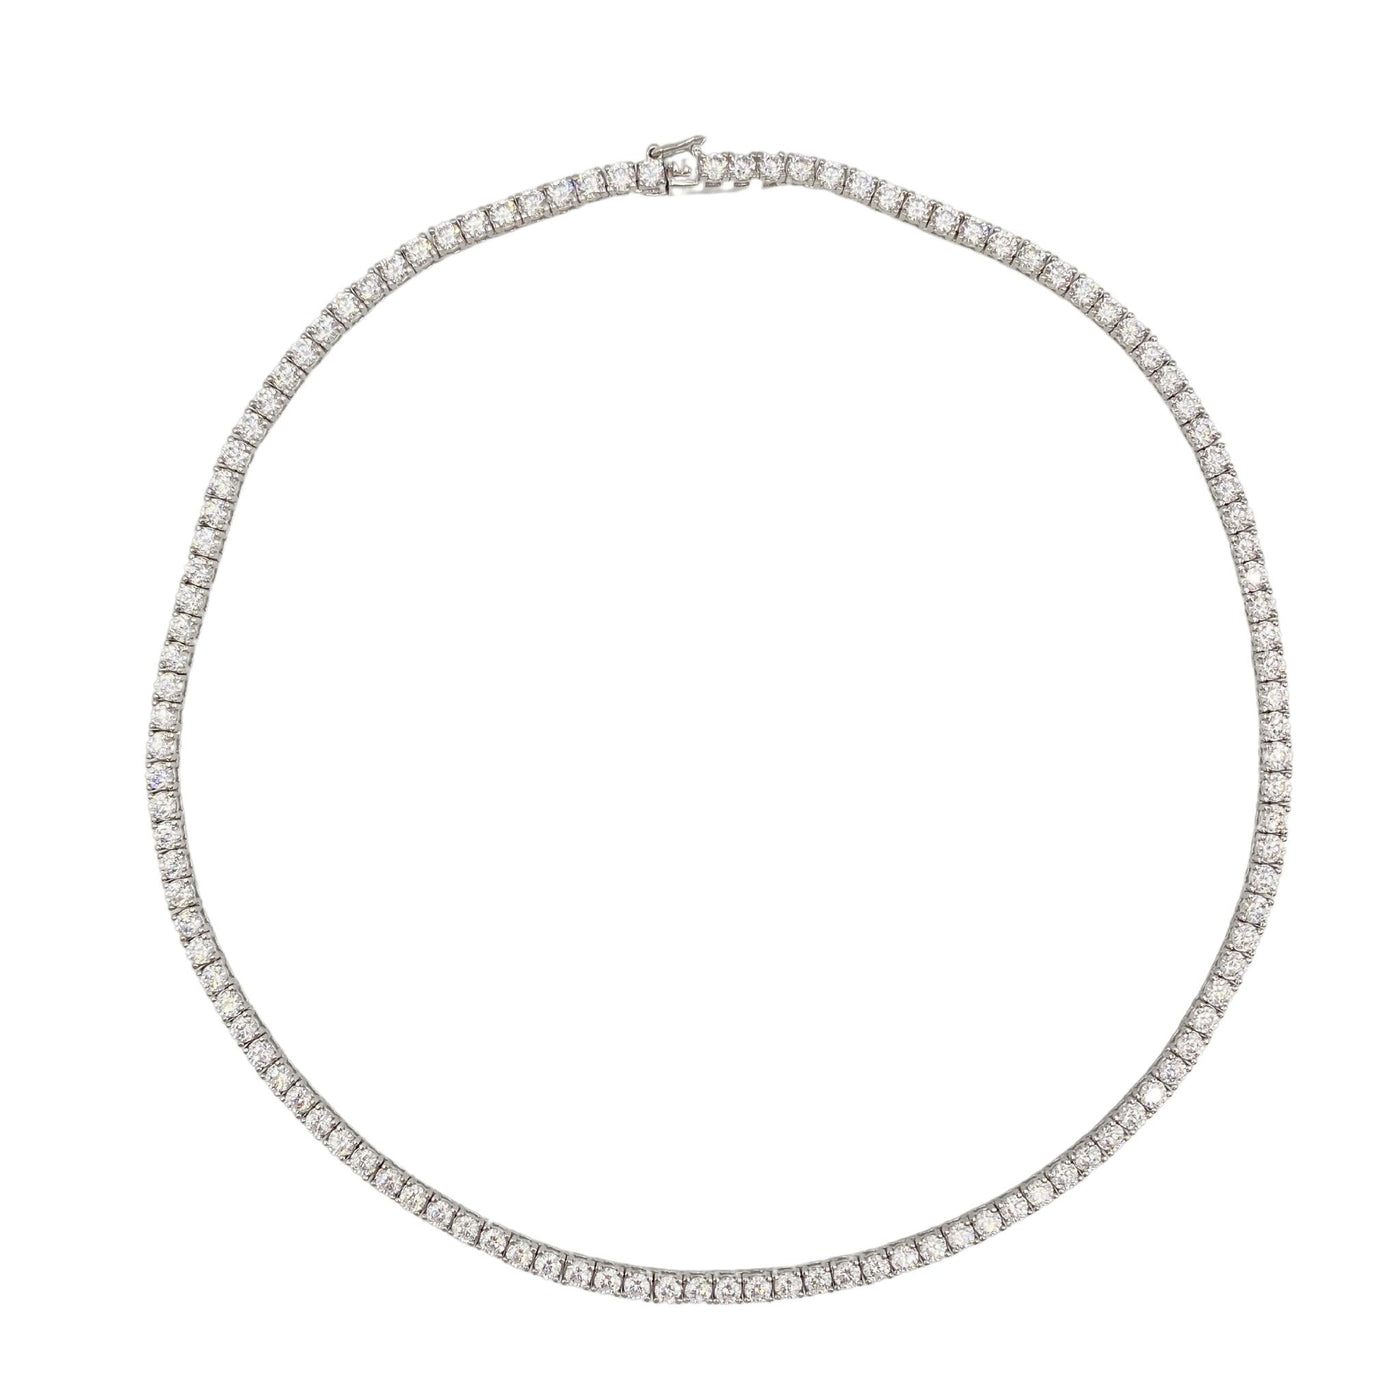 Silver casting tennis necklace with white round stones - 2 mm